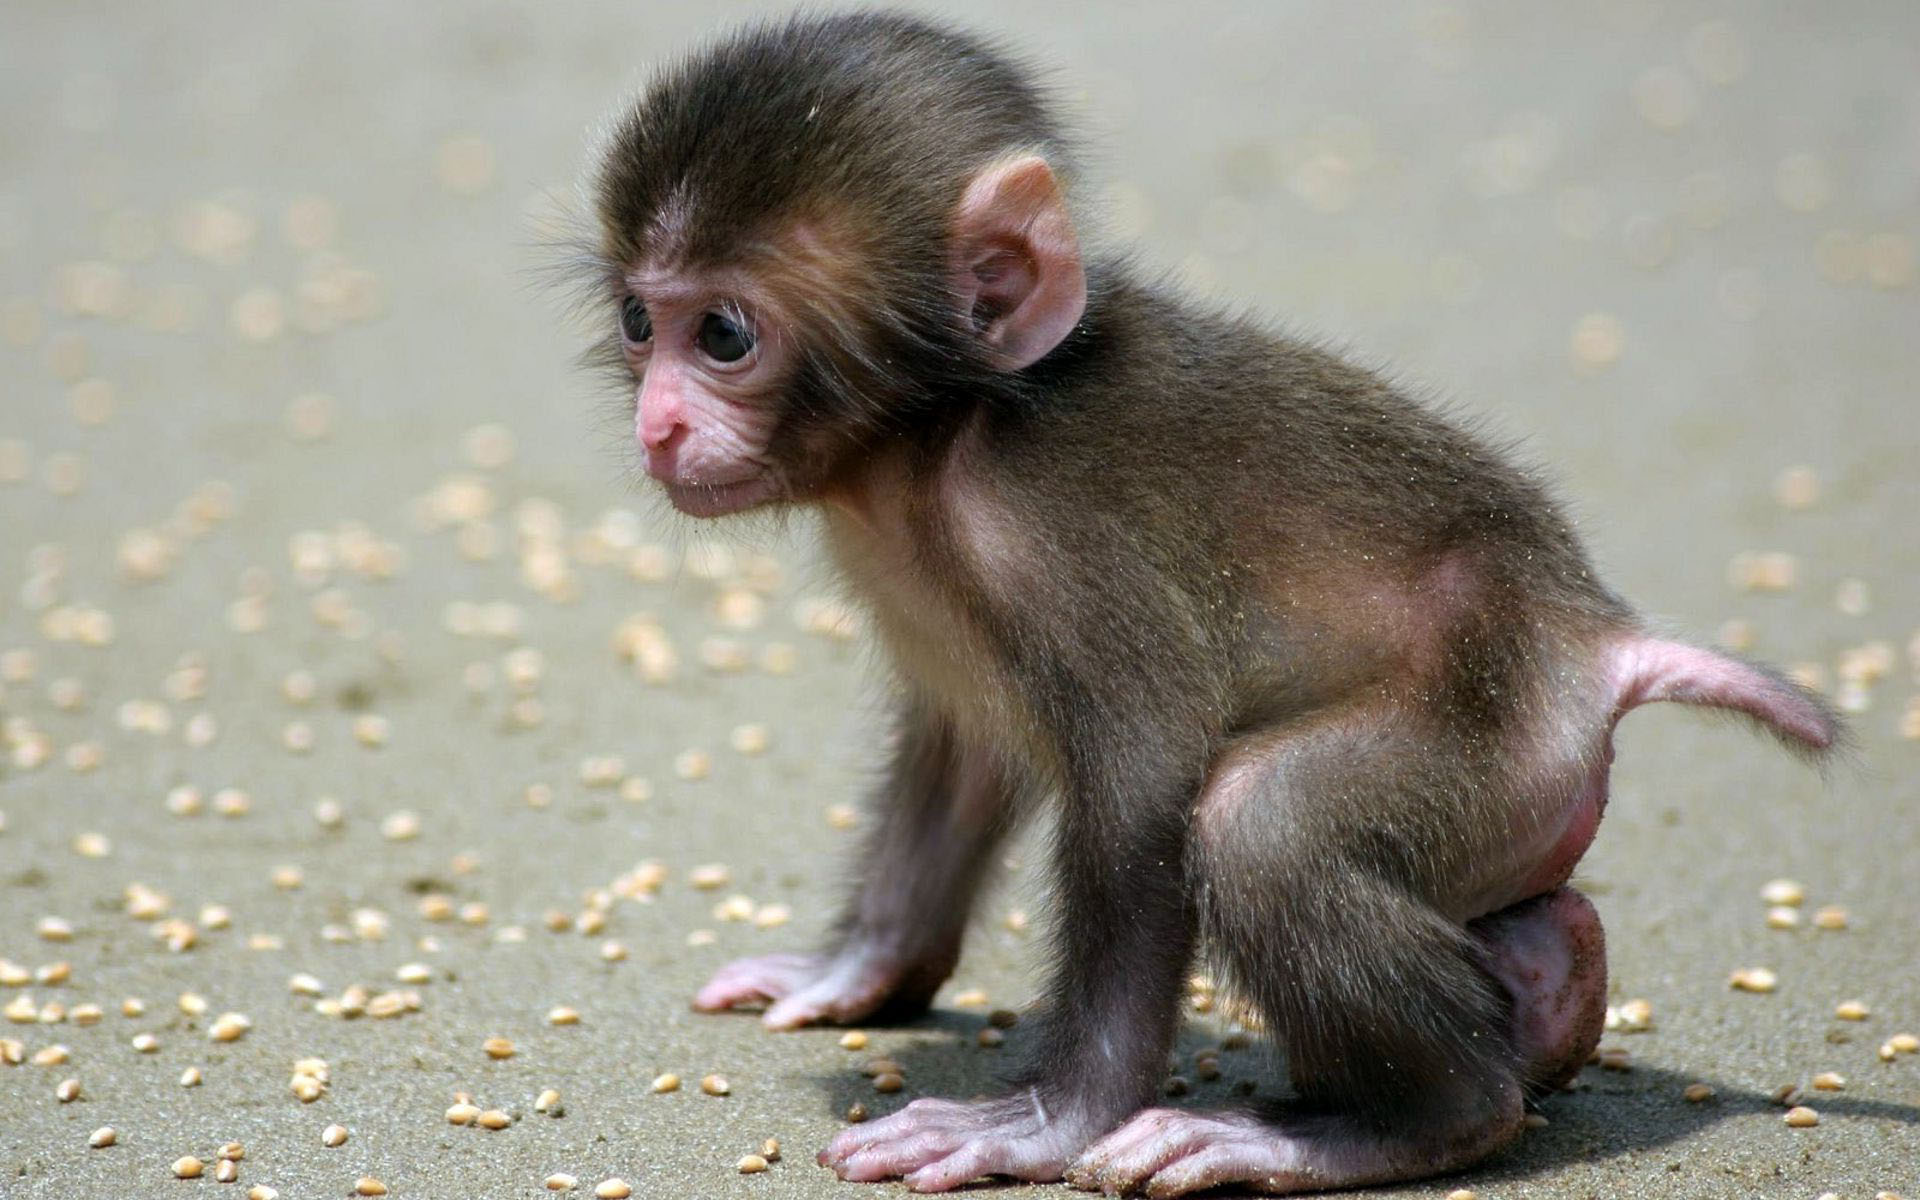 Baby Monkey Wallpapers images